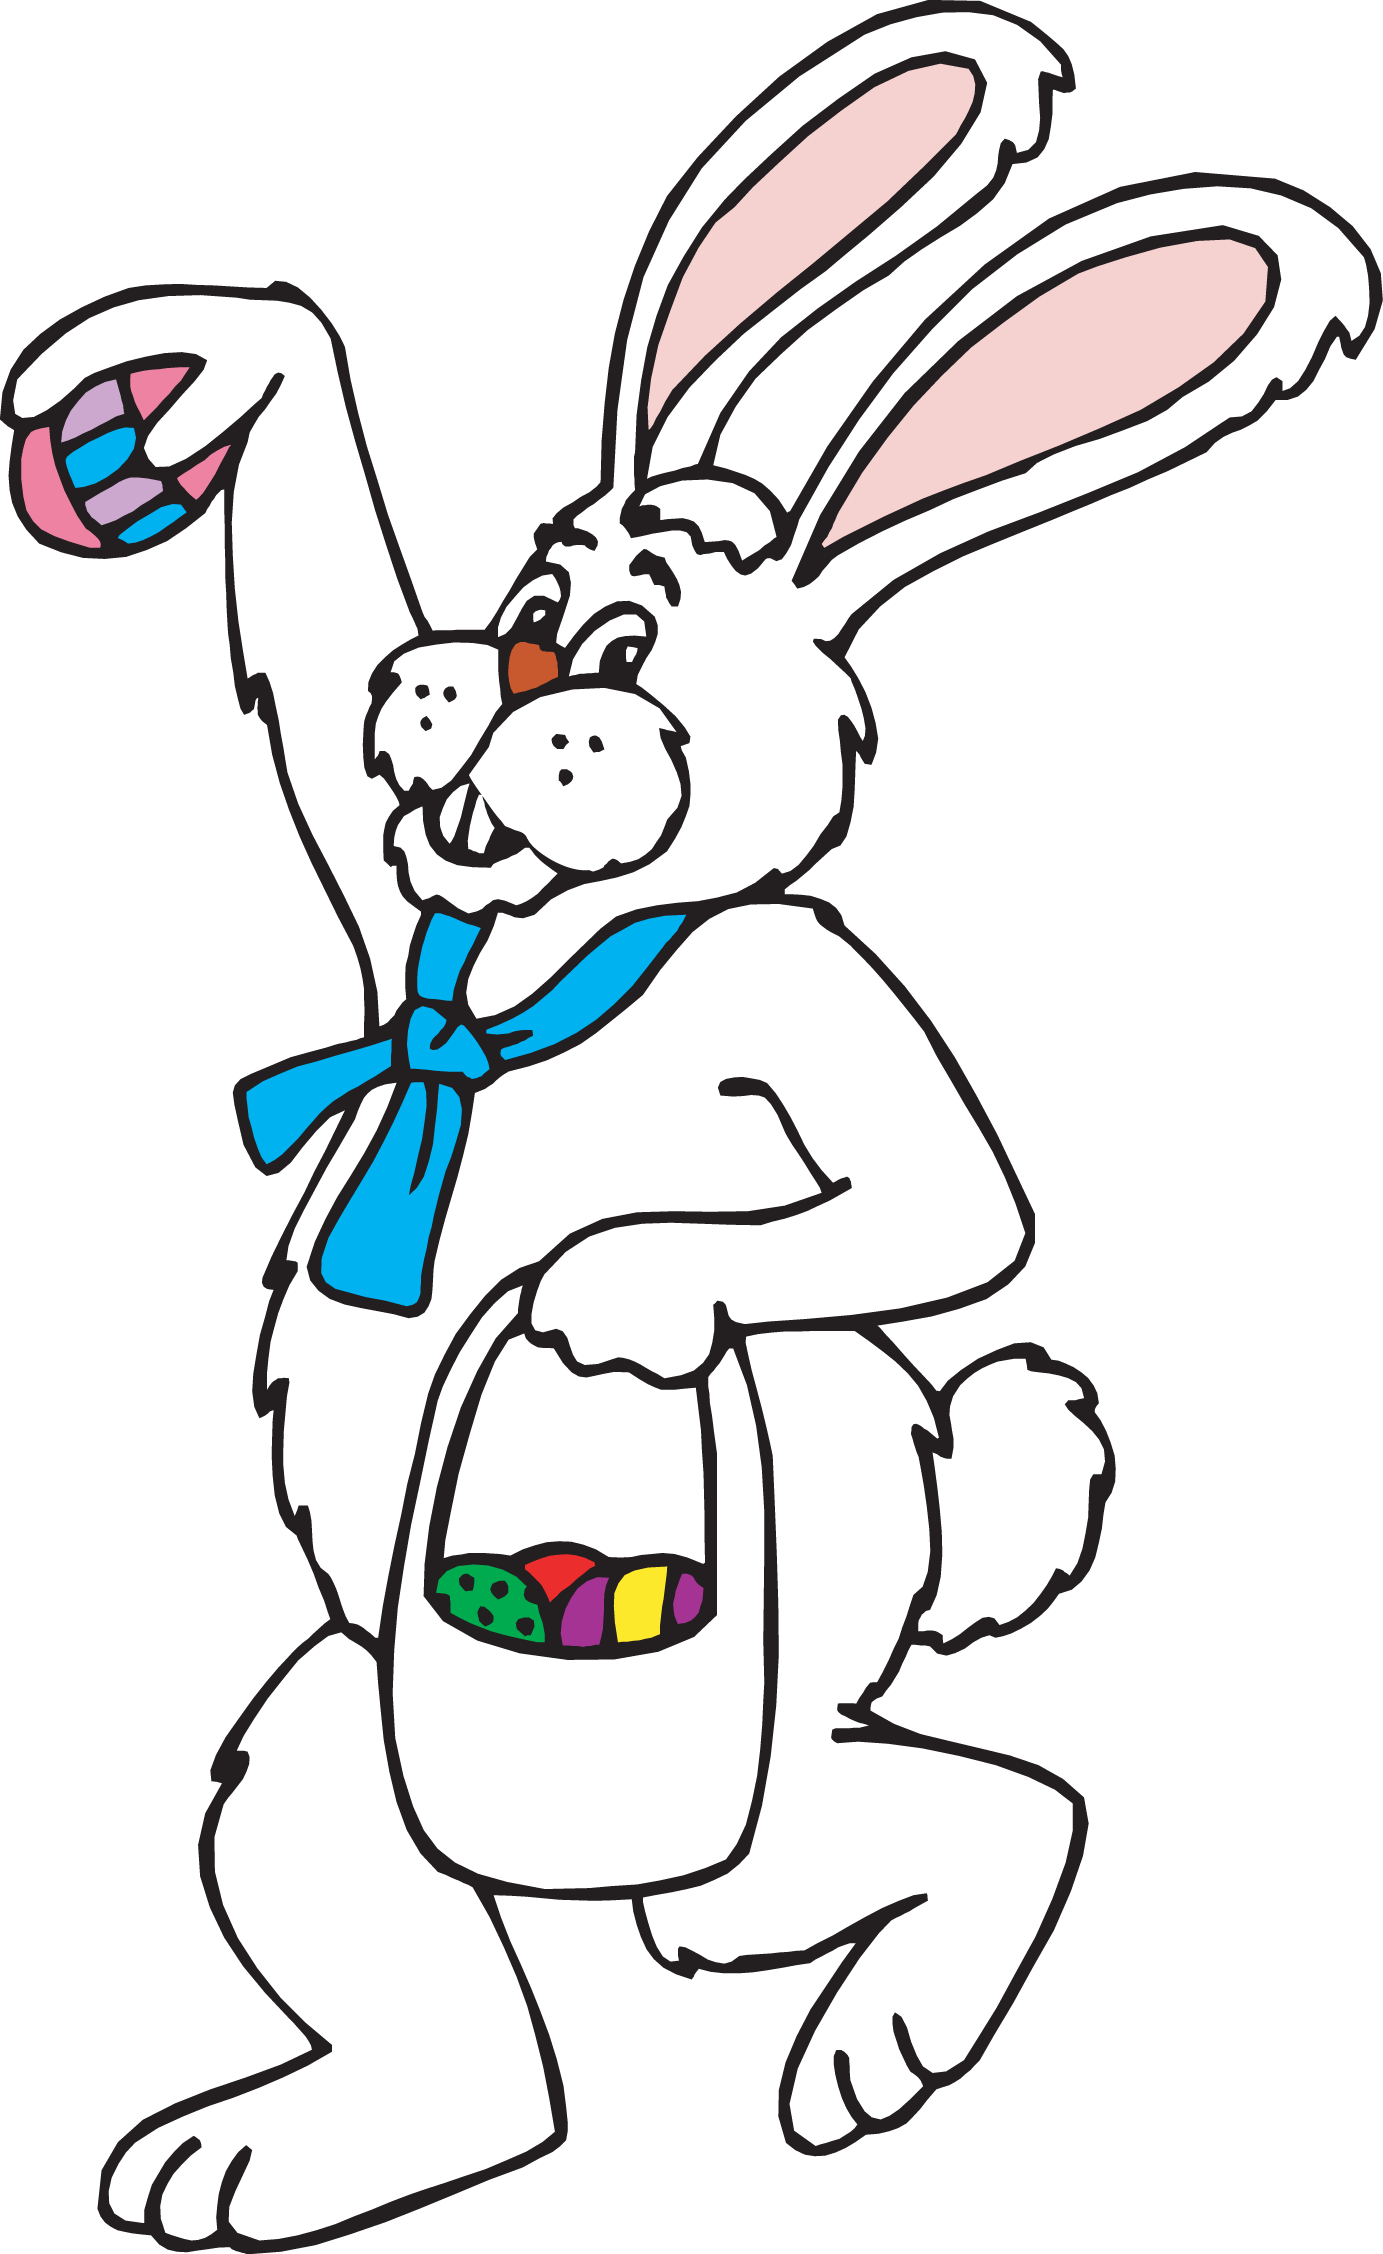 Easter Bunny Clip Art Free Download - Free Clipart ...